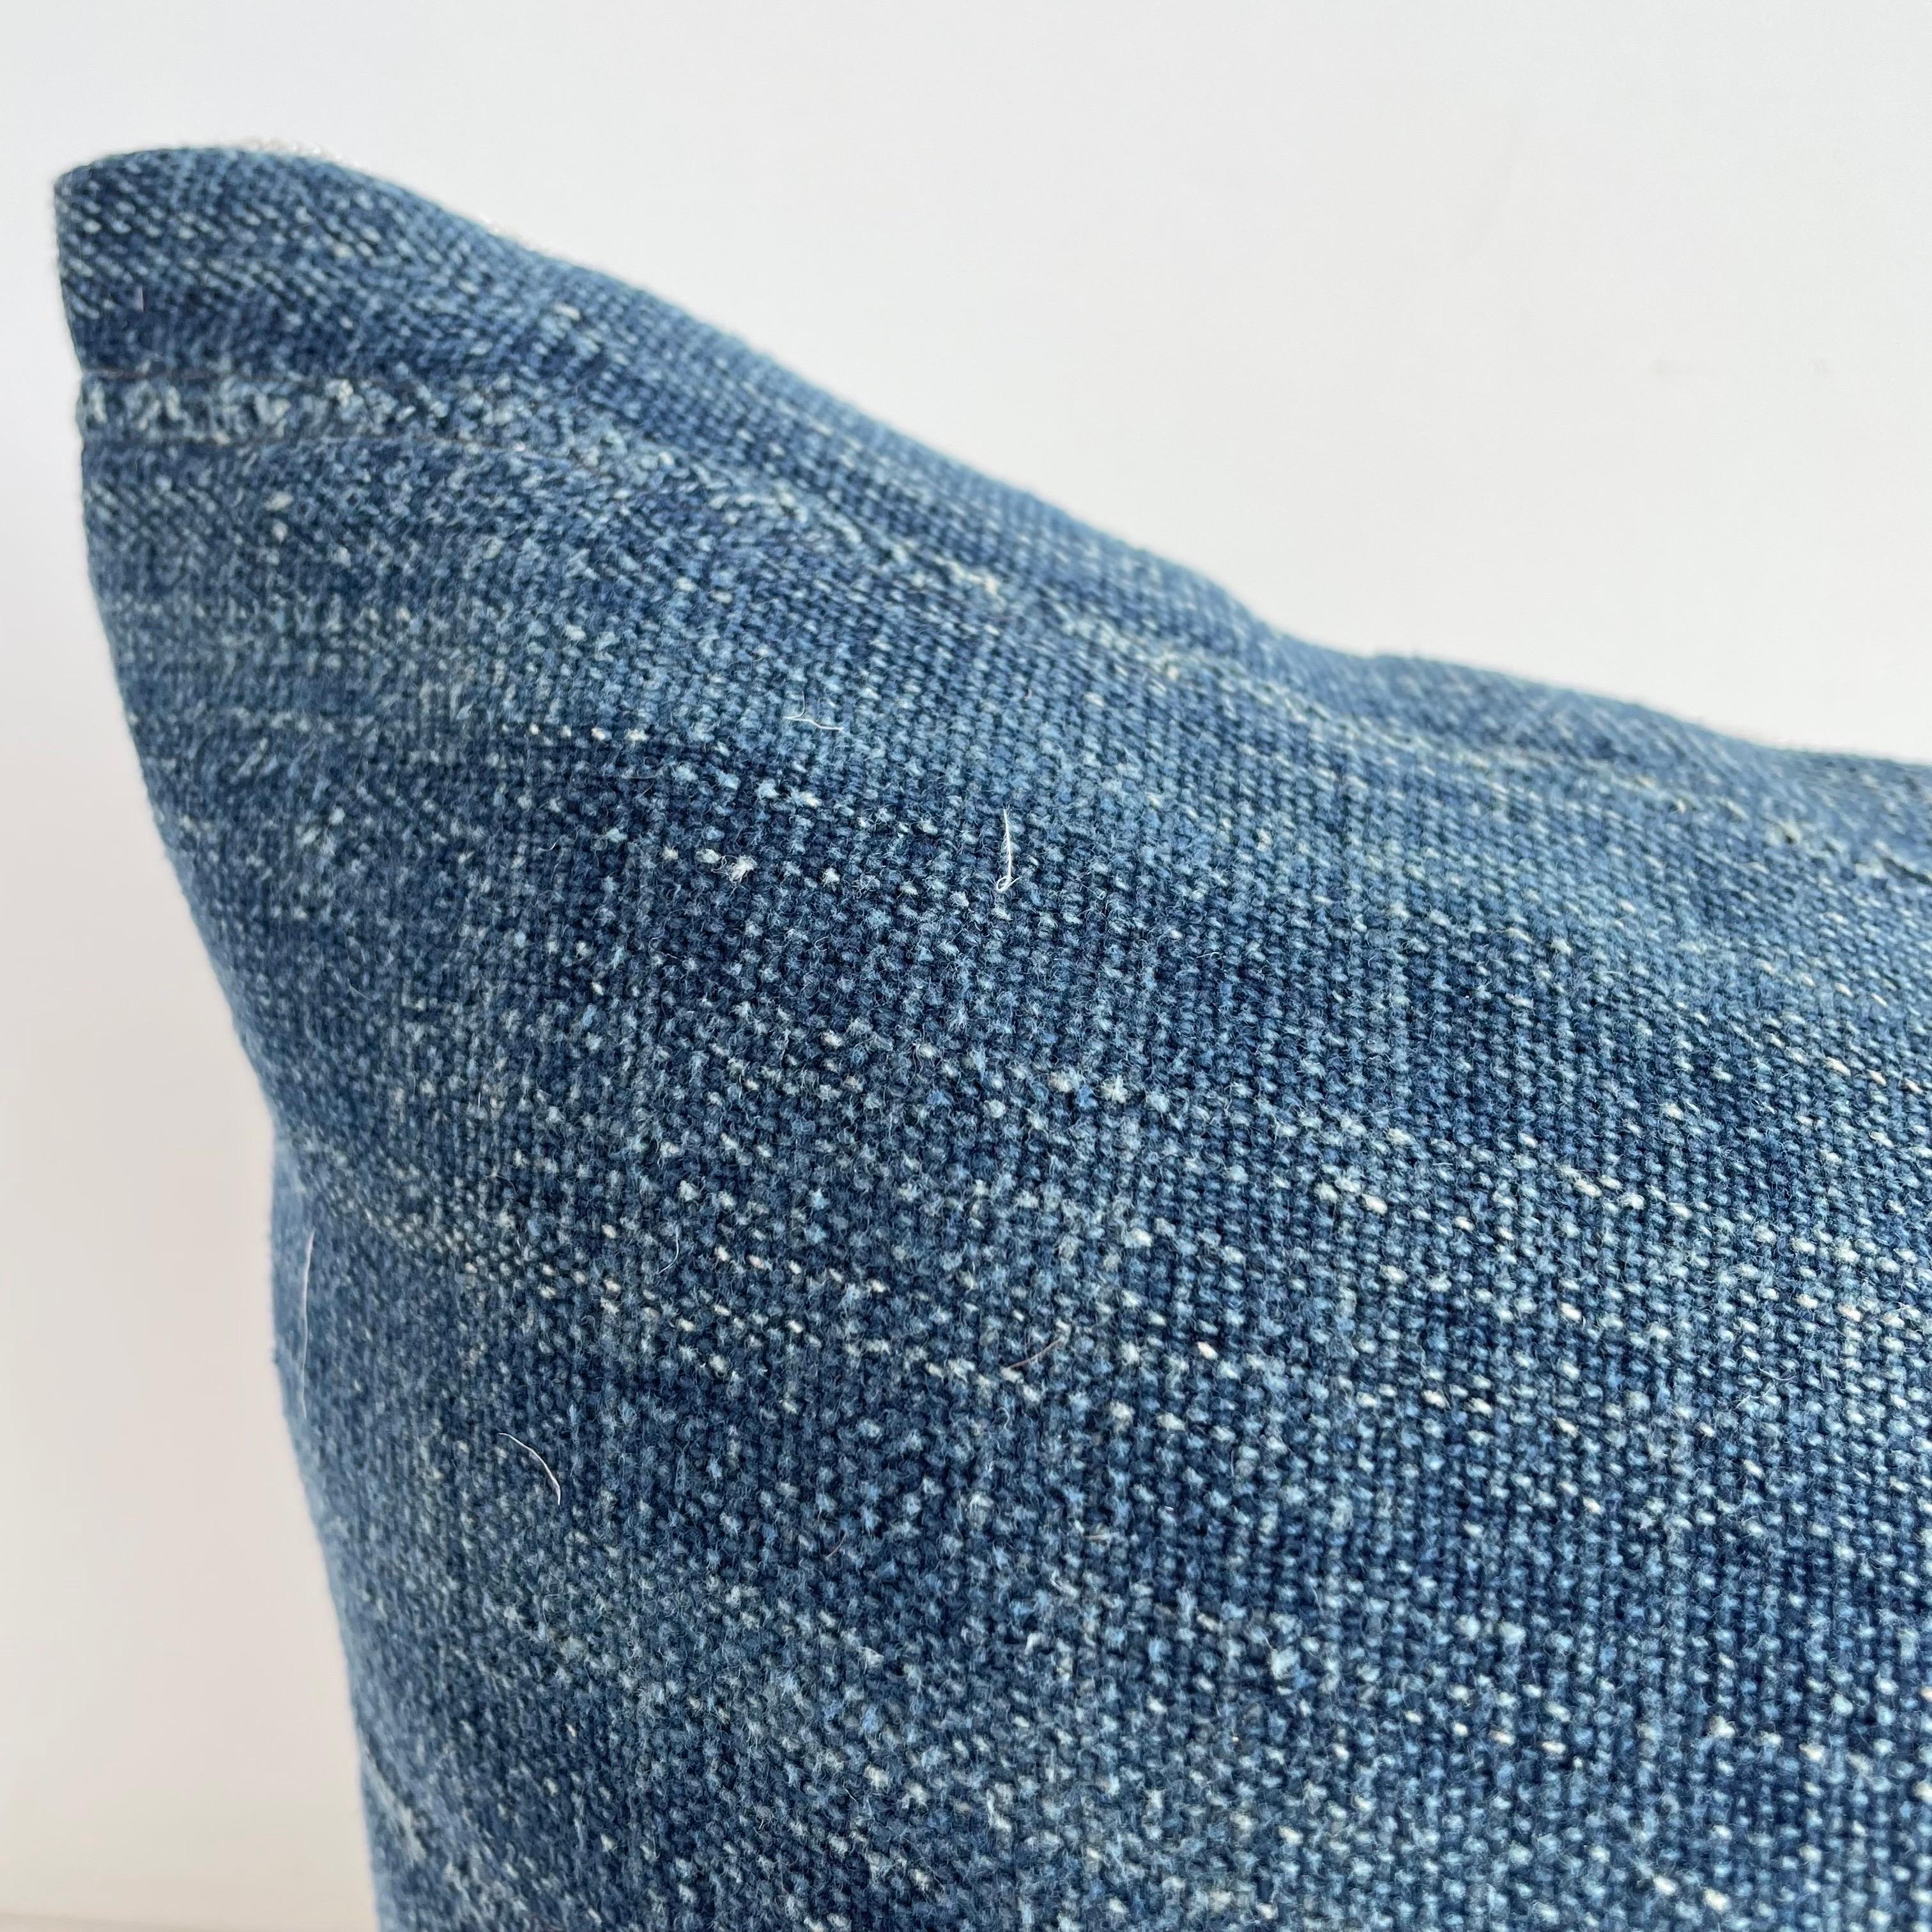 Antique faded blue indigo stripe African mudcloth pillows with original fringe details. Fabric: Vintage hemp fabric front, natural colored linen fabric back. Due to the nature of vintage textiles, there may be fading or markings. While they add to